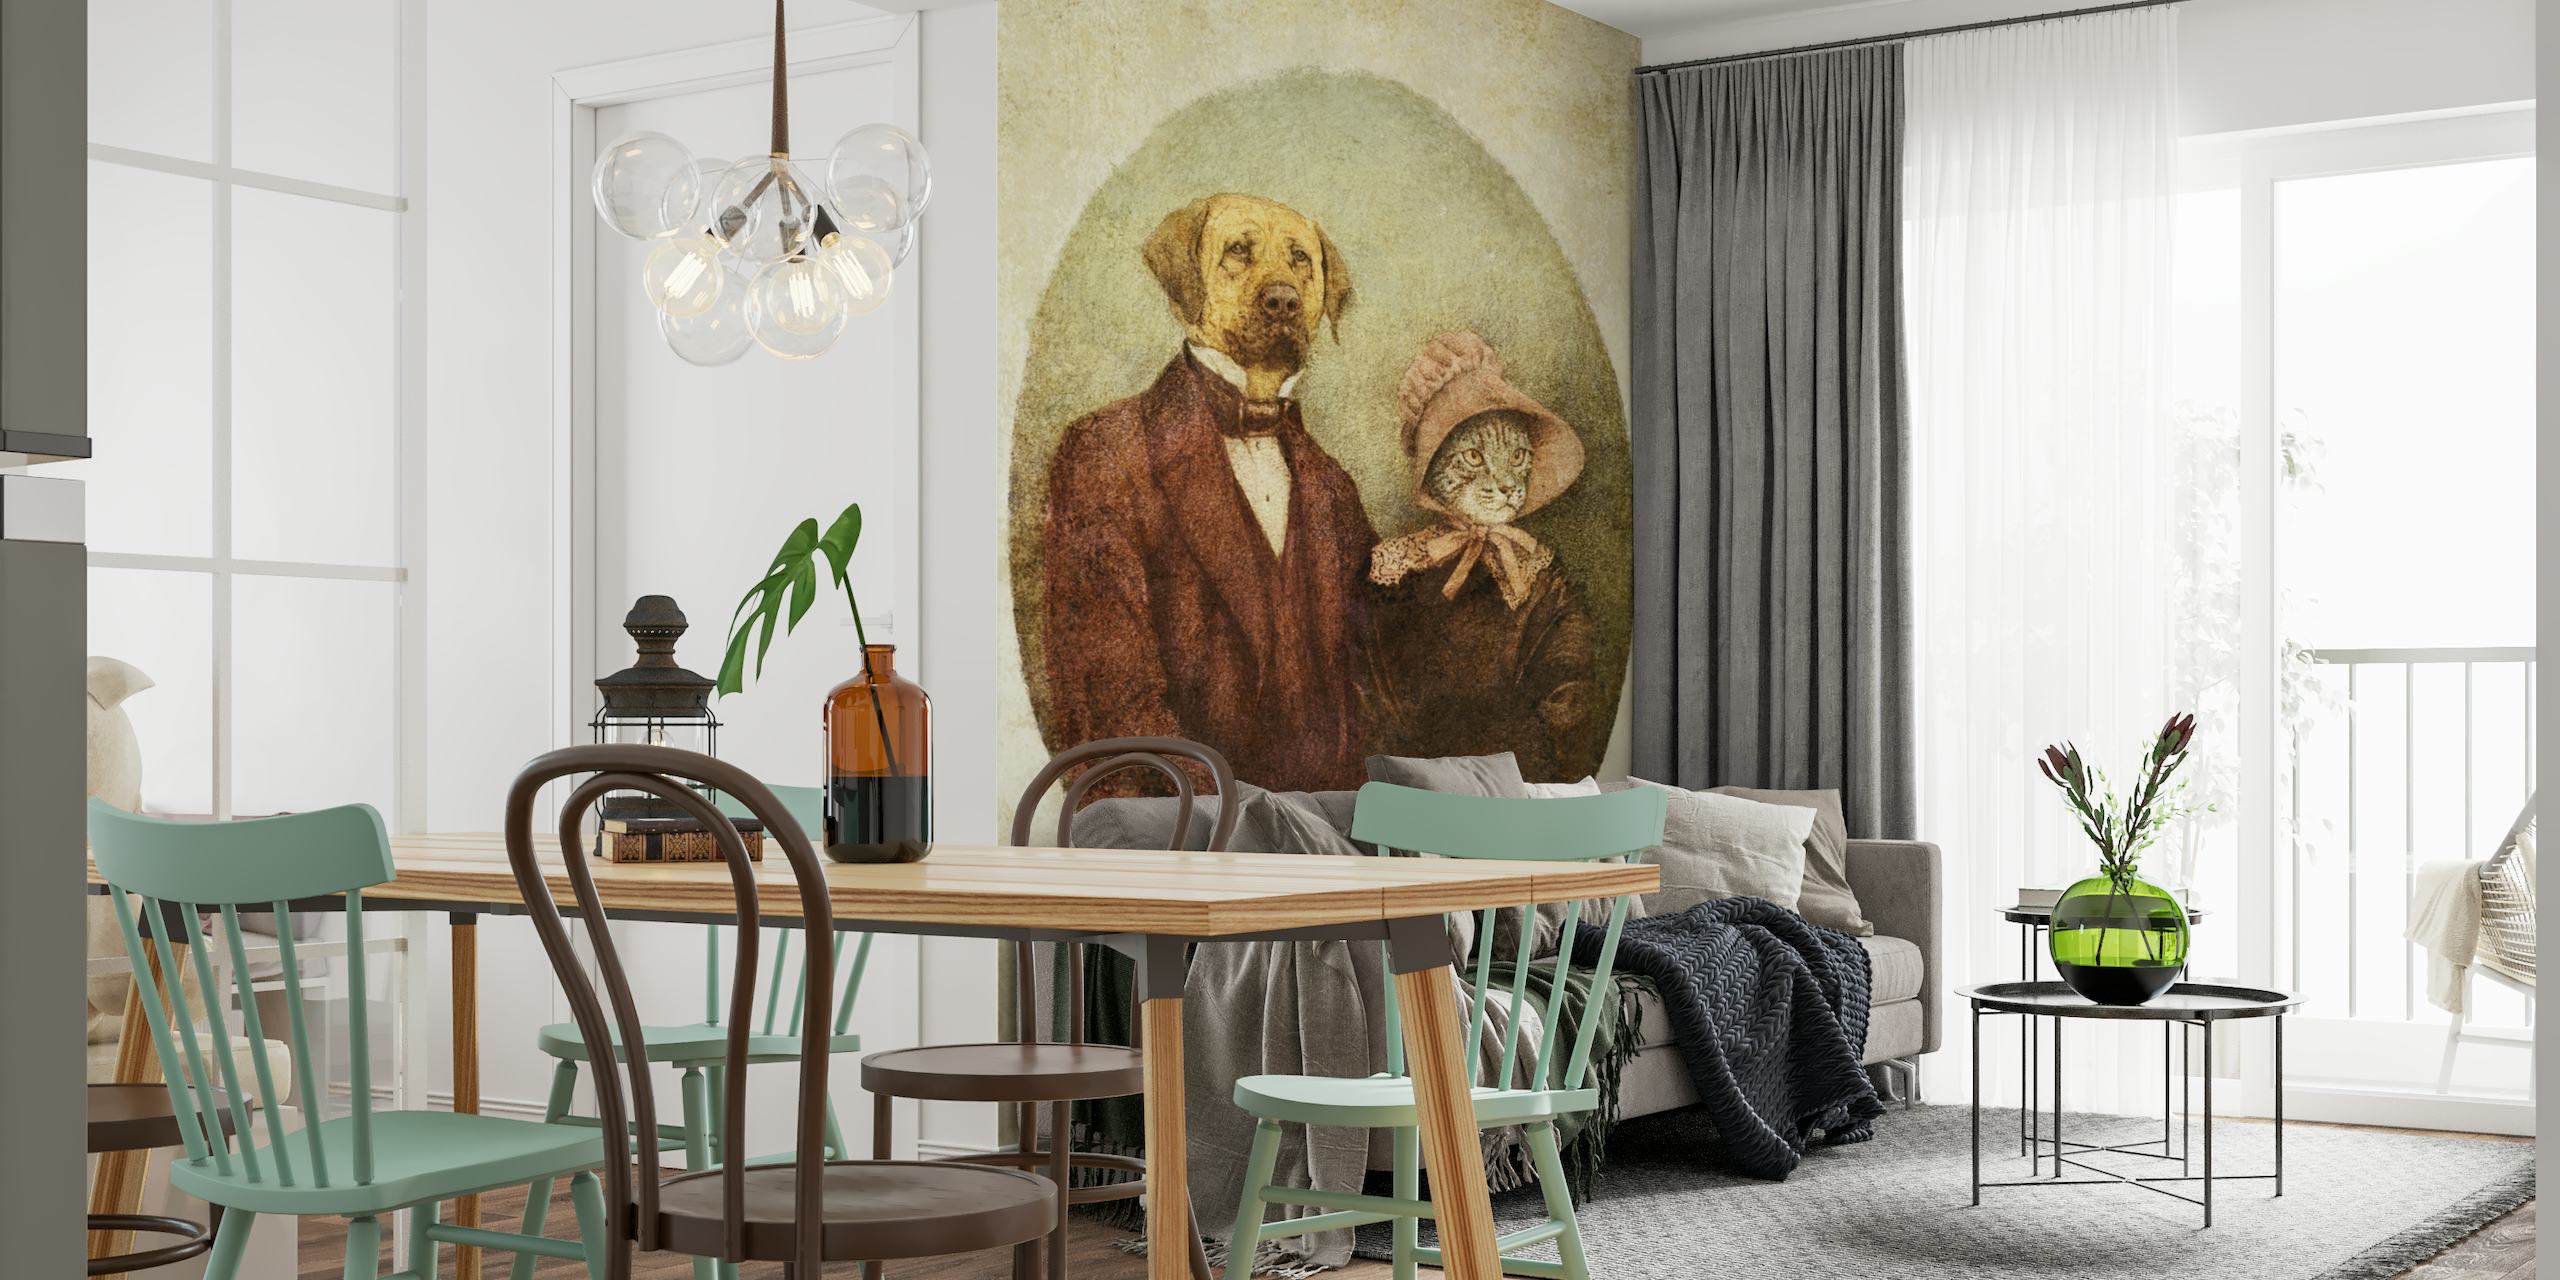 Anthropomorphic dog couple in vintage attire wall mural